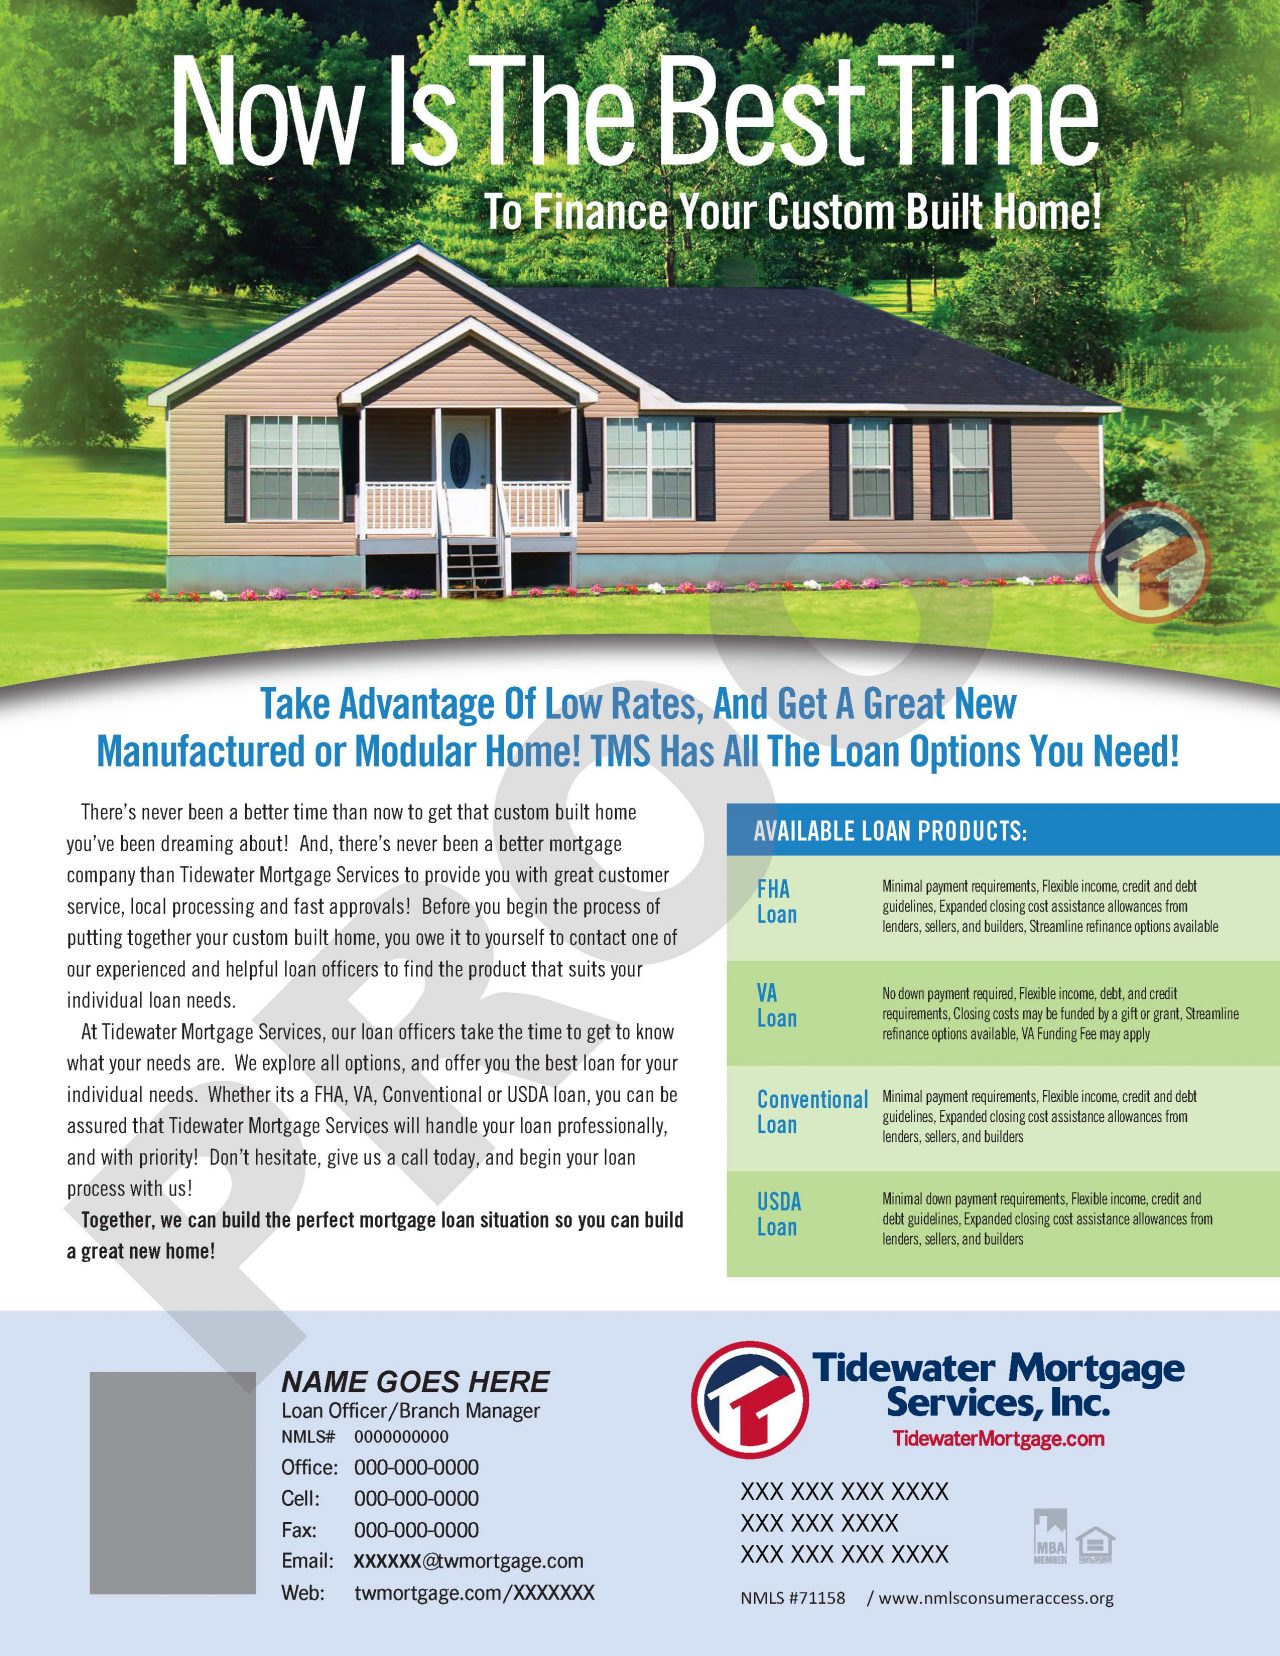 tms claytonhomes 042618 Tidewater Mortgage Services Inc